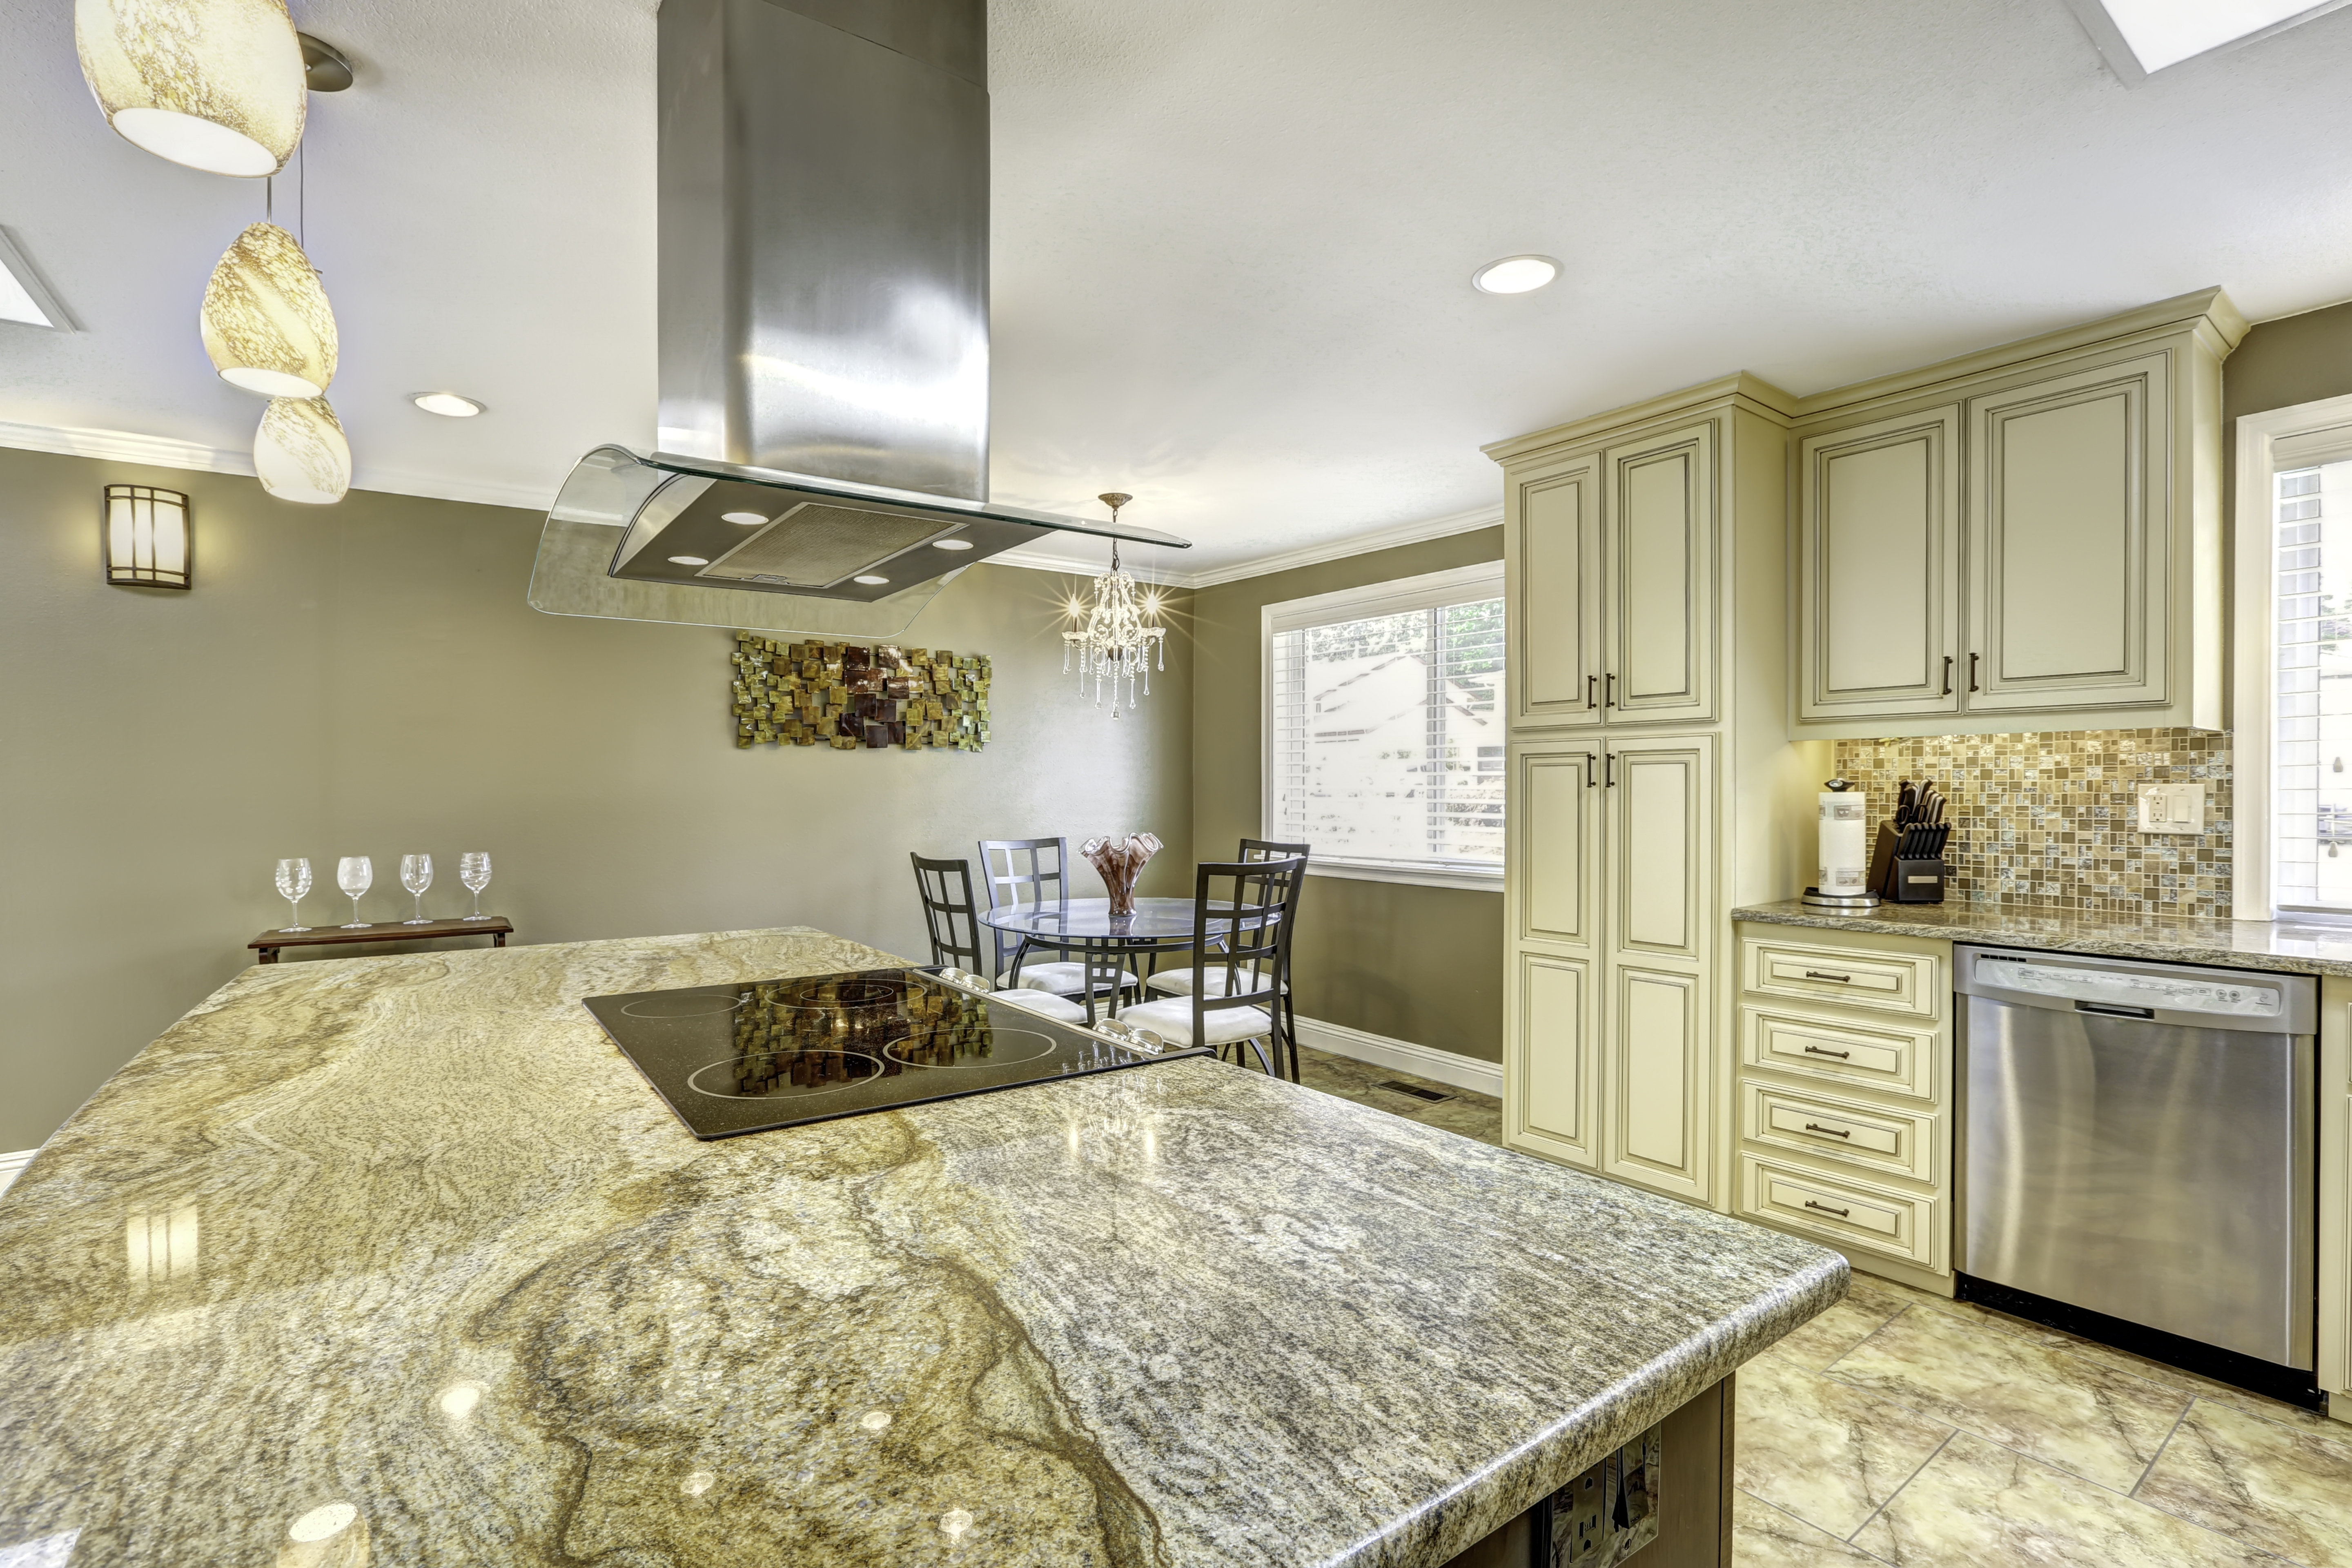 Marblelife Of Marble Stone Restoration Services